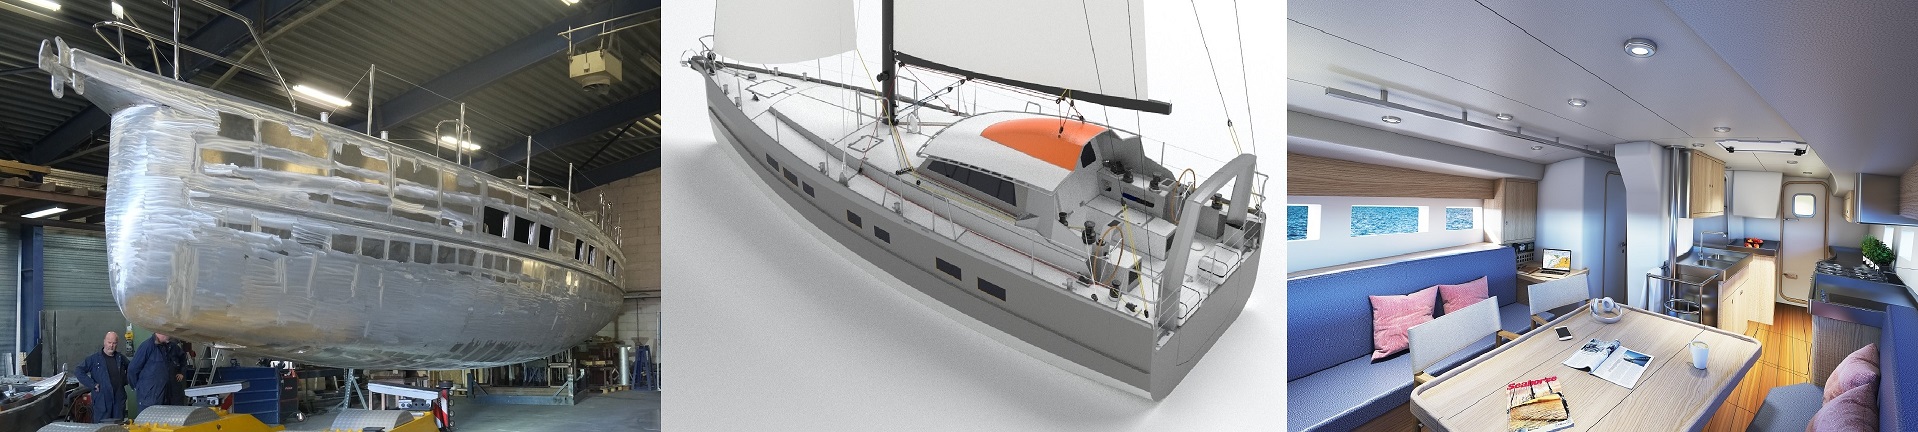 Composite image of Owen Clarke’s 2022 design, ‘Lynx’, the ice rated lifting keel aluminium expedition yacht. Image is made up of photograph of the aluminium hull, and 3D graphics of the exterior and interior design of the sailboat.